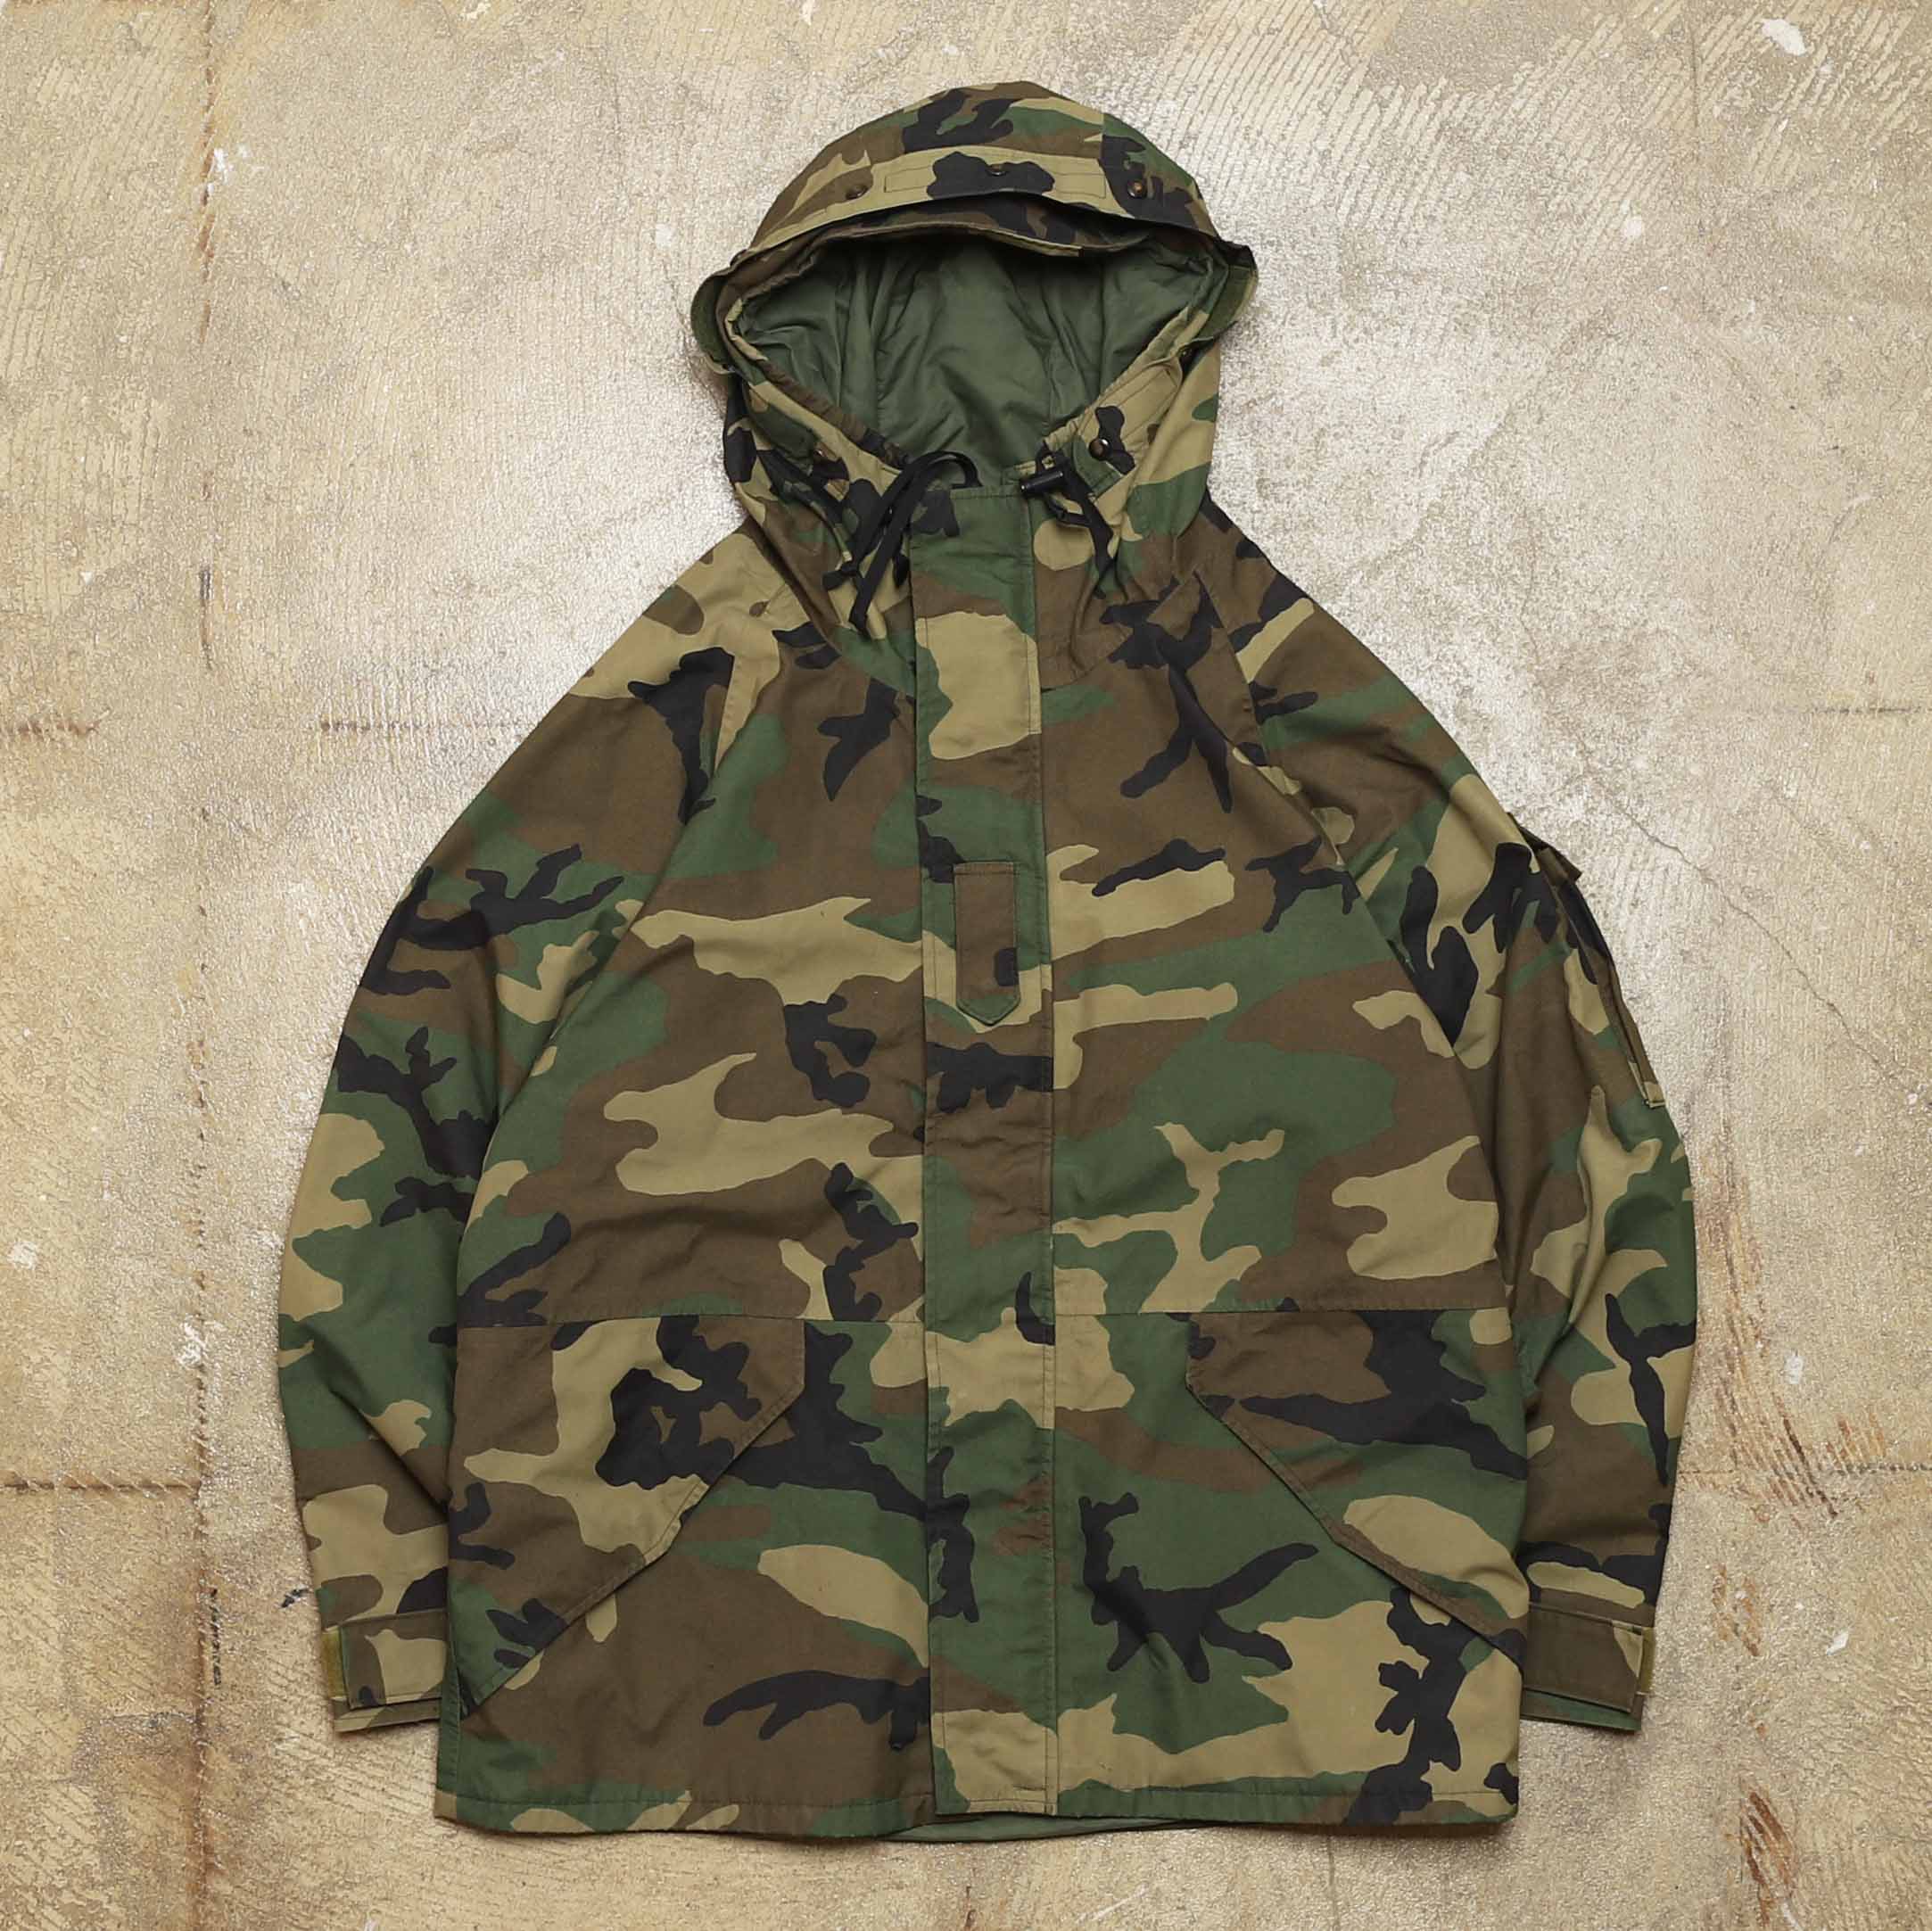 ORIGINAL US ARMY COLD WEATHER PARKA GORE-TEX - CAMOUFLAGE